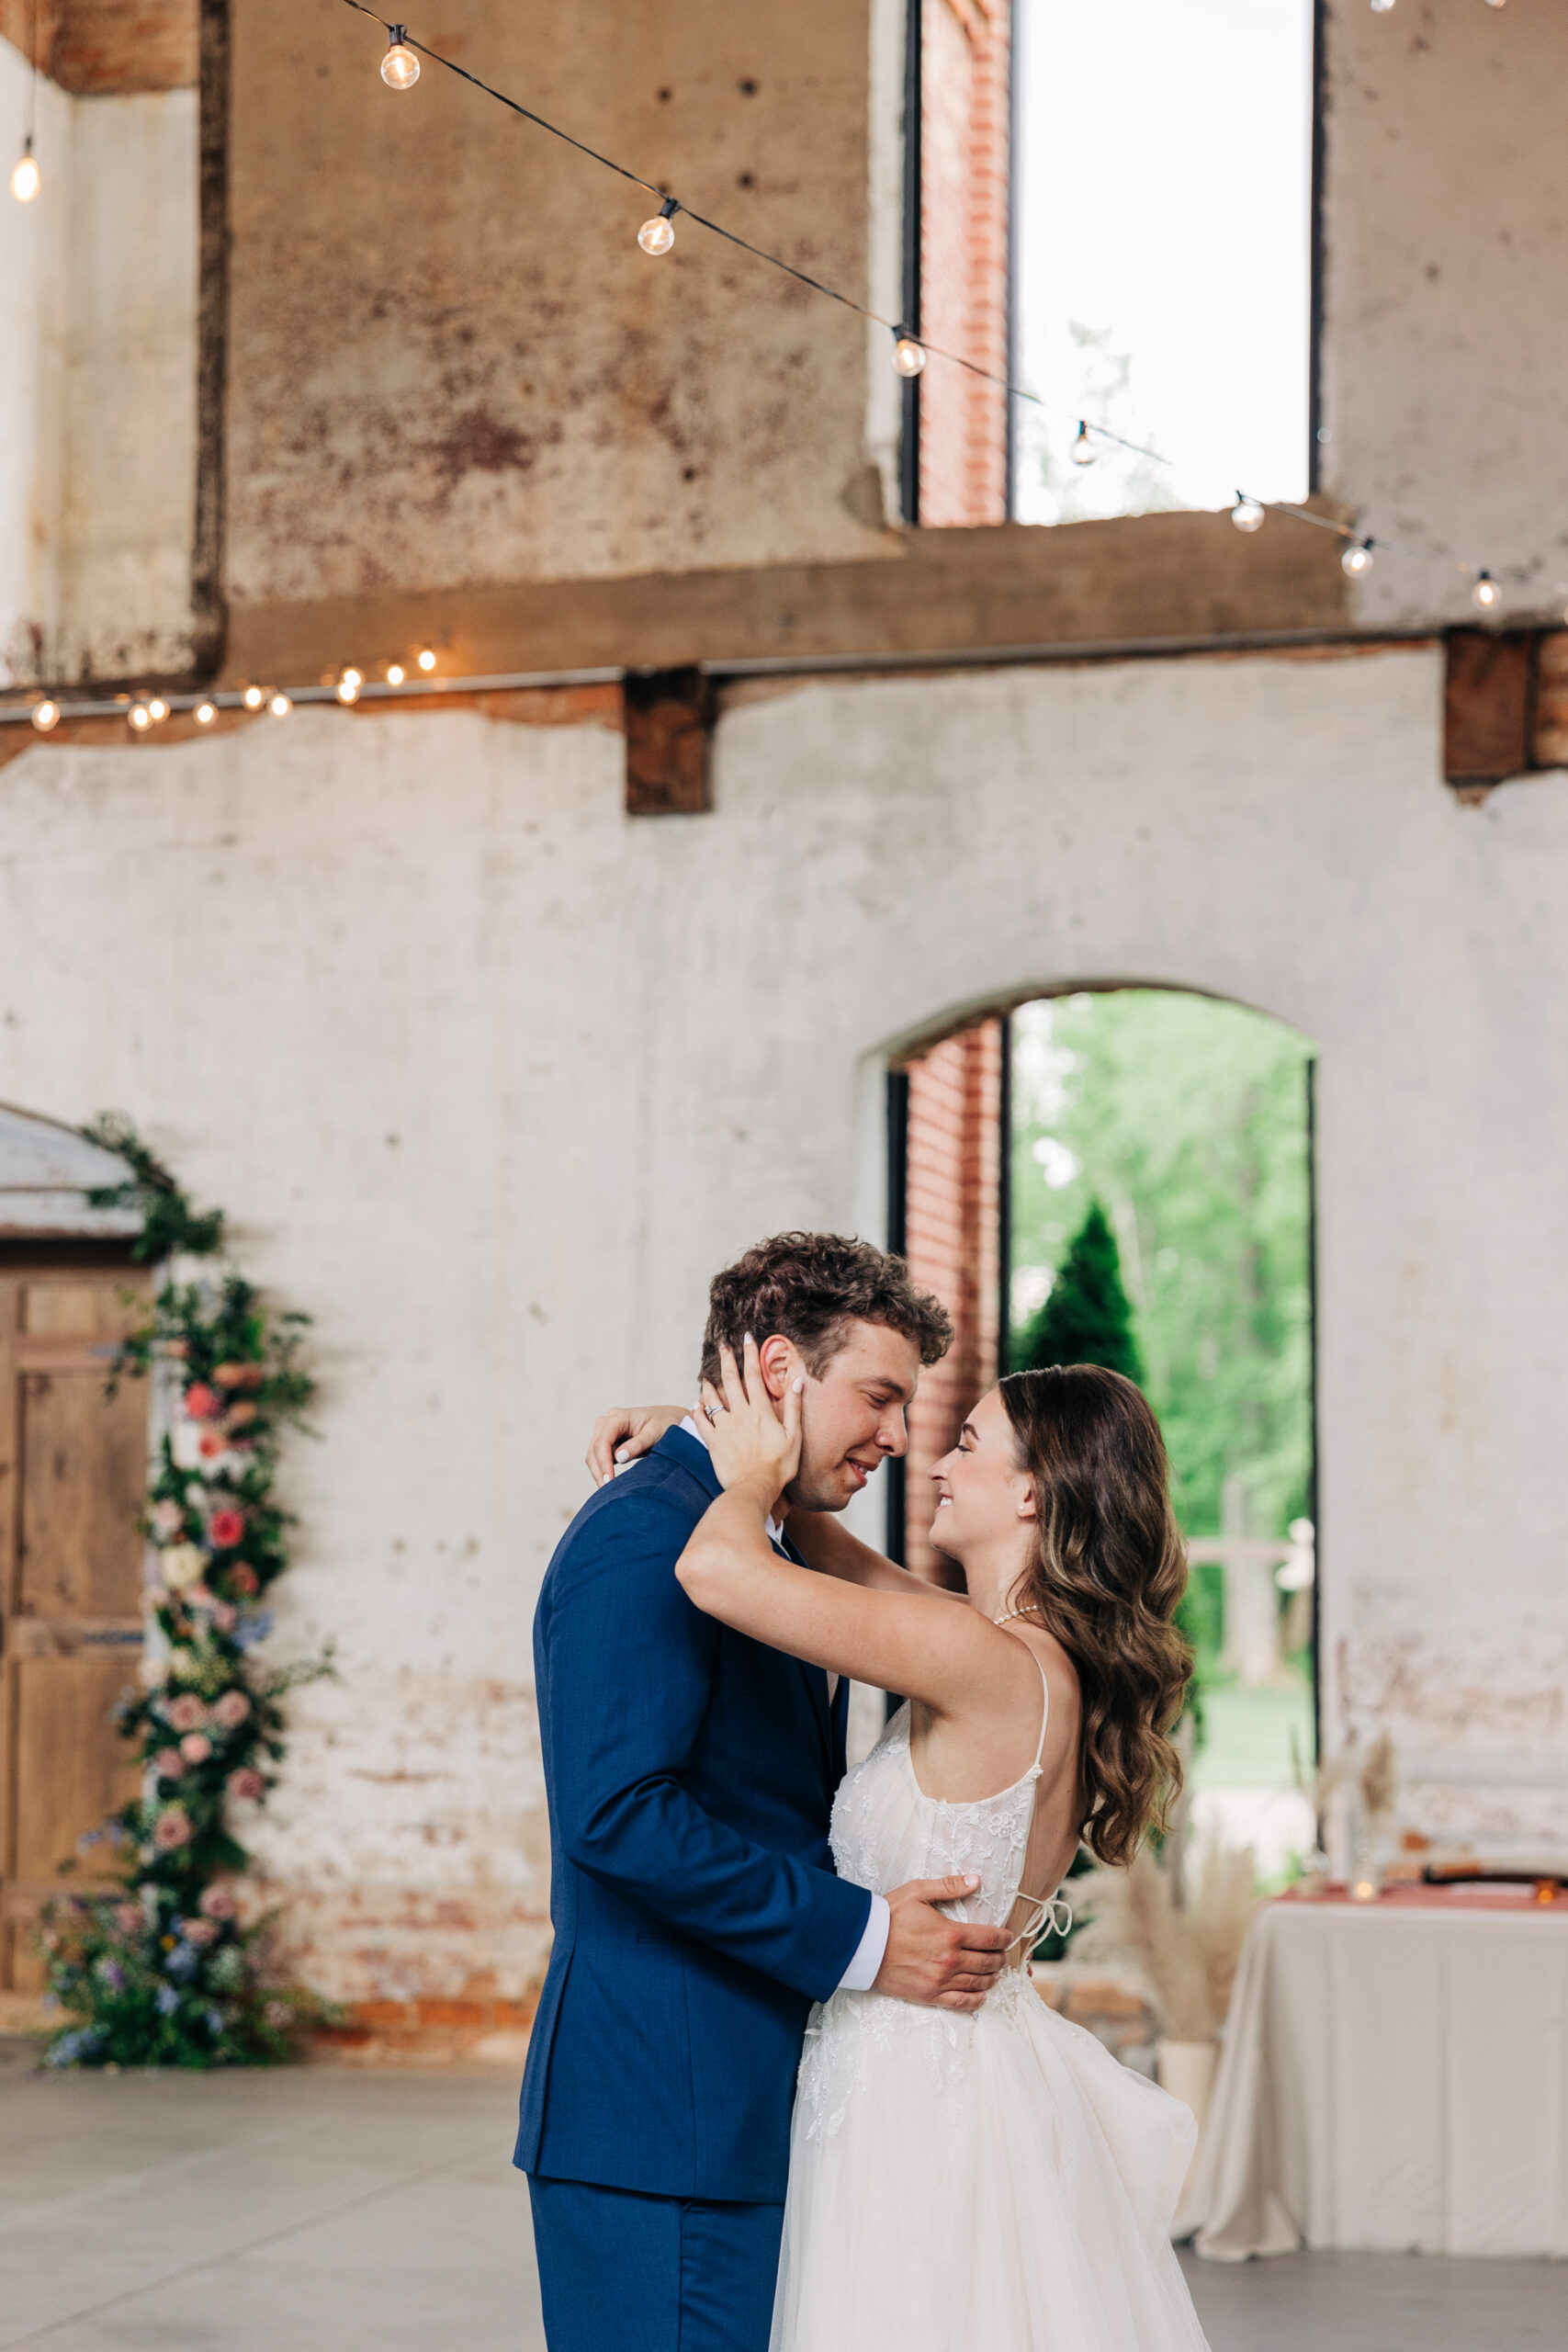 Newlyweds share an intimate dance at their Providence Cotton Mill wedding reception